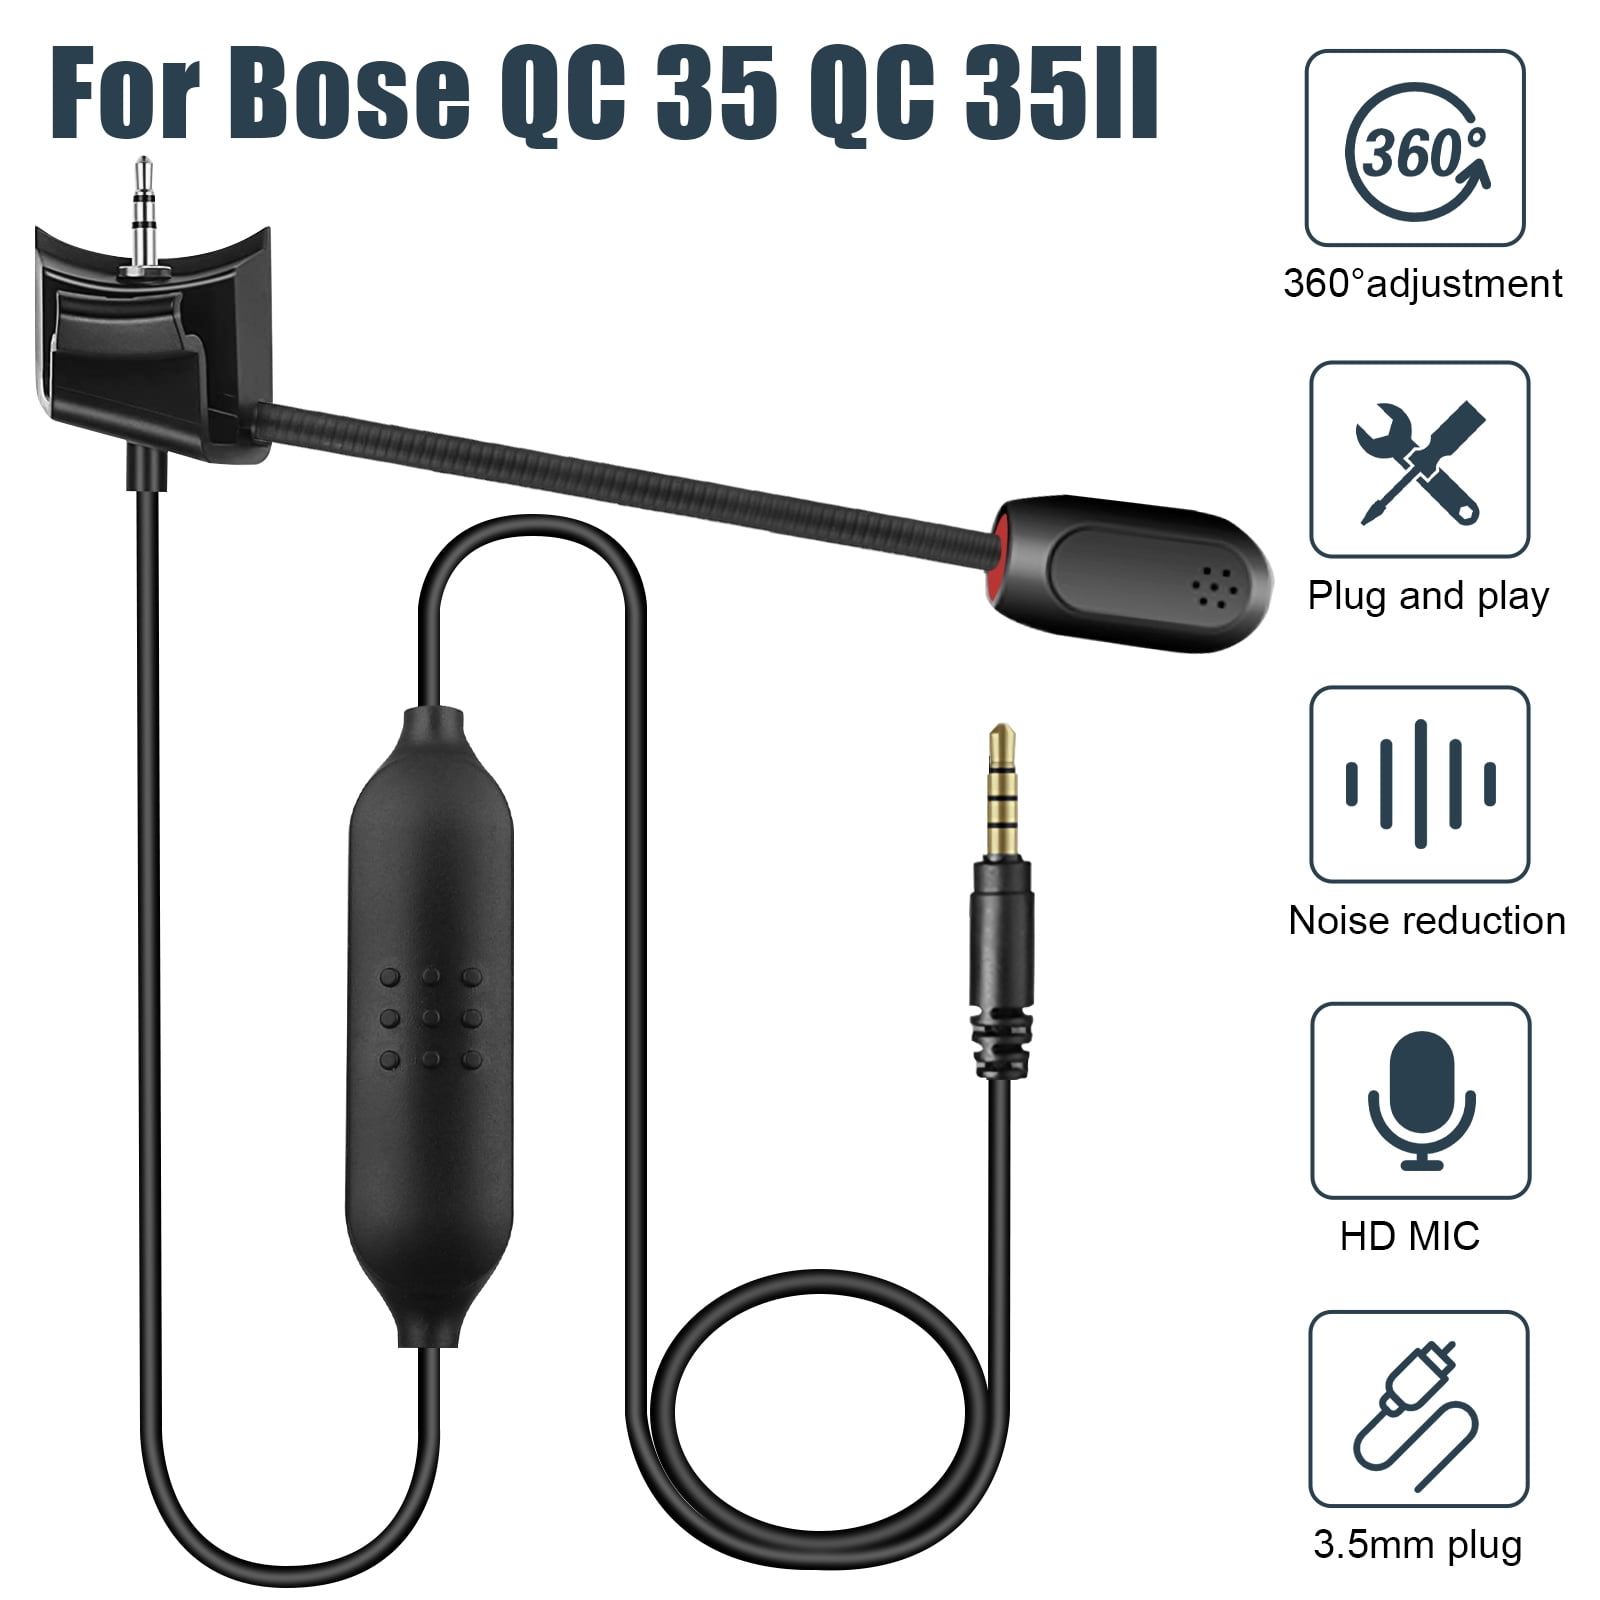 Replacement for Bose QC35ii QC35 Cable,Boom Microphone Gaming Cable with Mute Switch Compatible with Bose QuietComfort 35 II QuietComfort 35 Headphones for PC,Laptop PS4 PS5 Xbox One Controller 